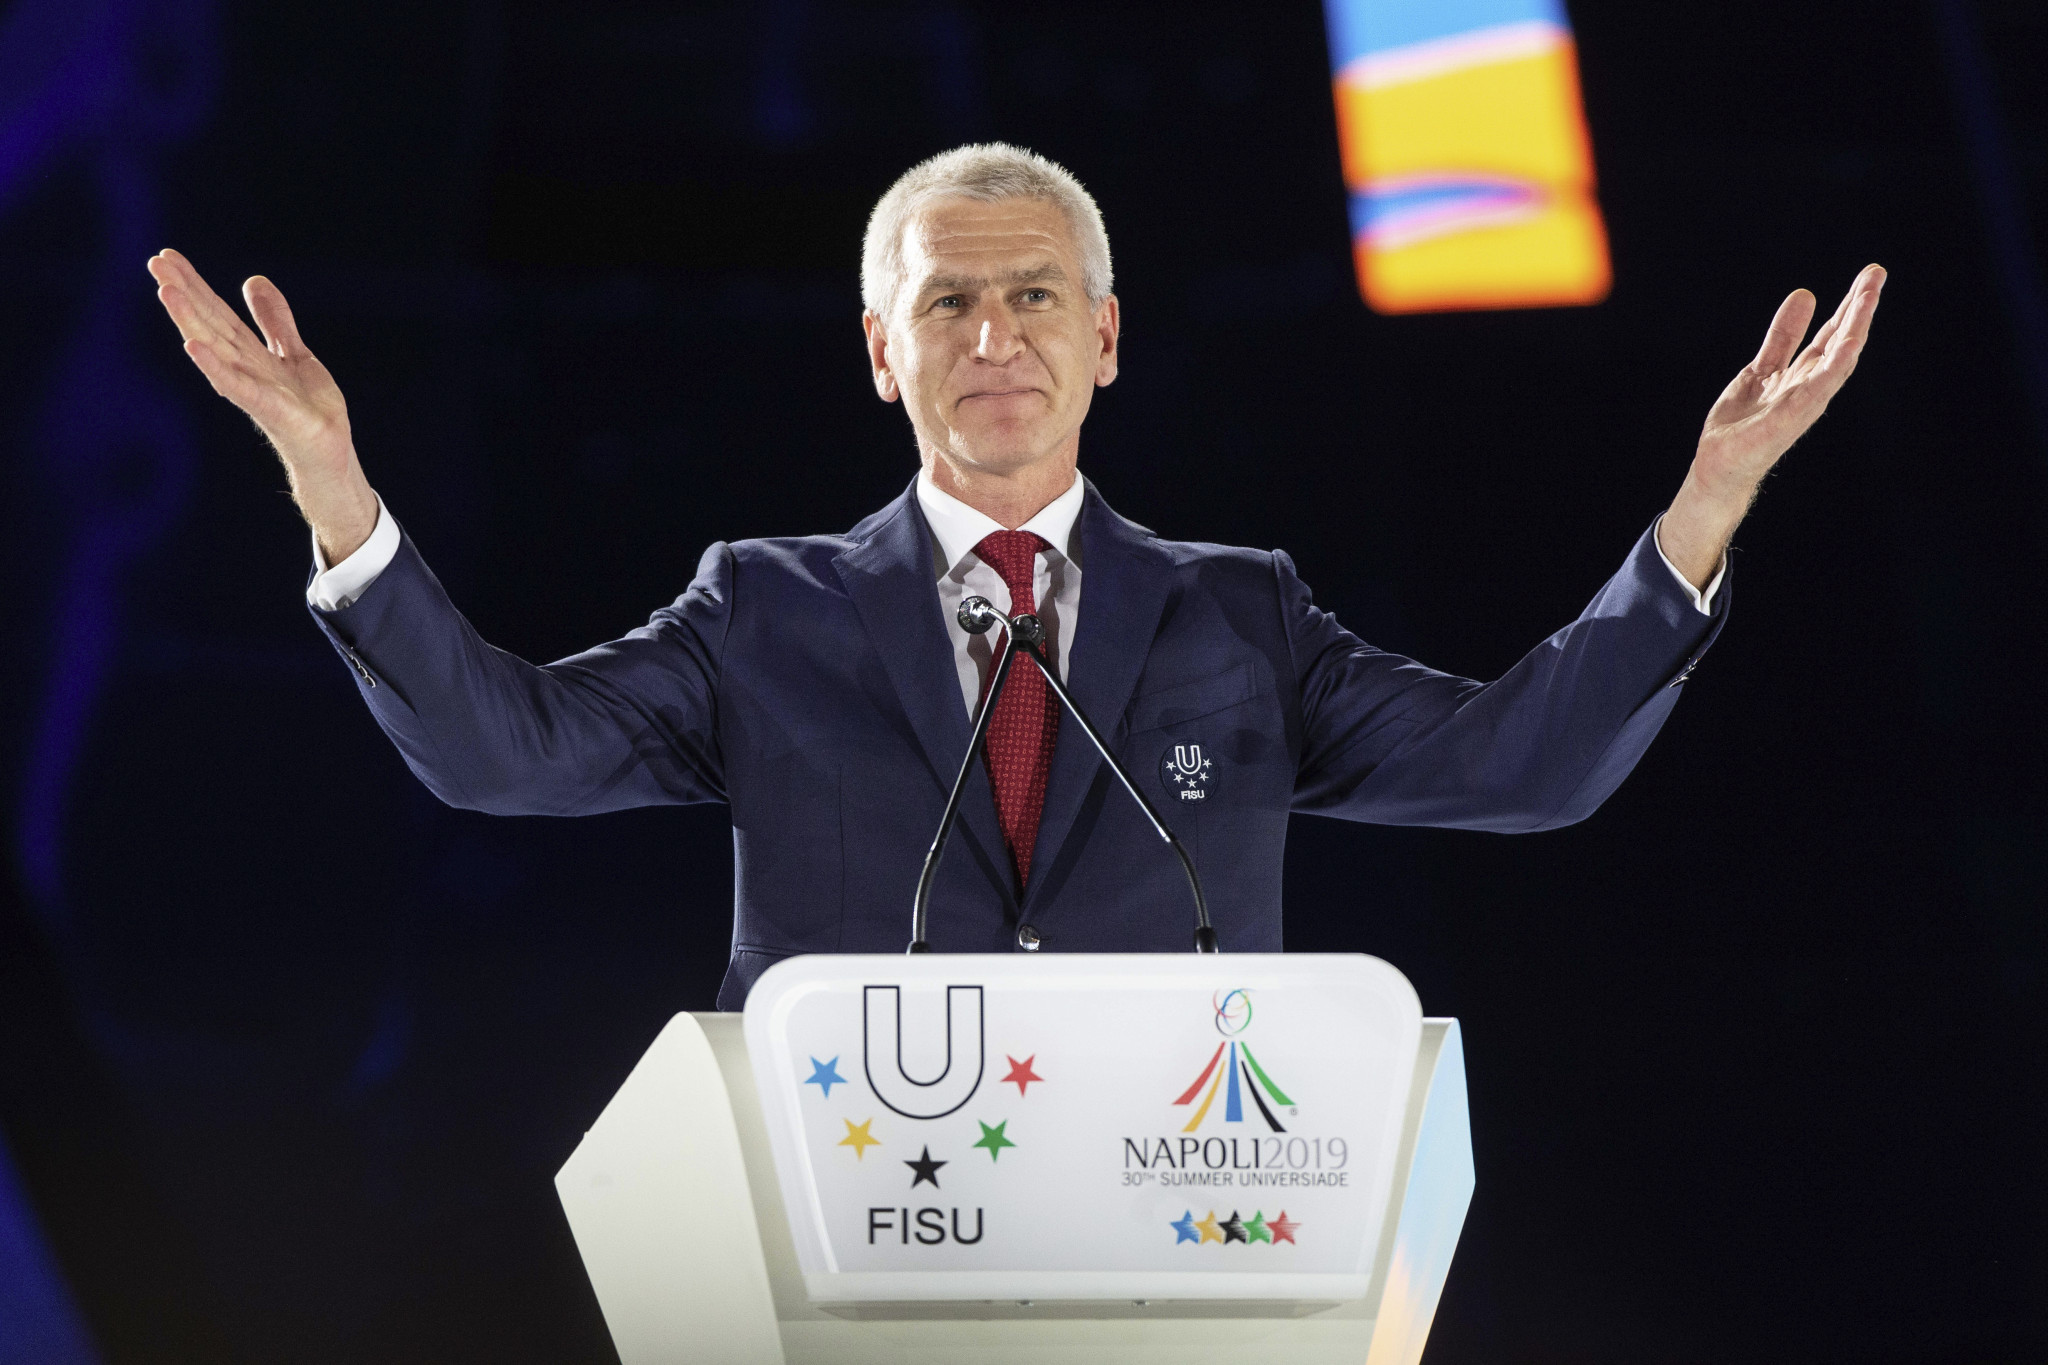 Matytsin poised to secure second term as FISU President